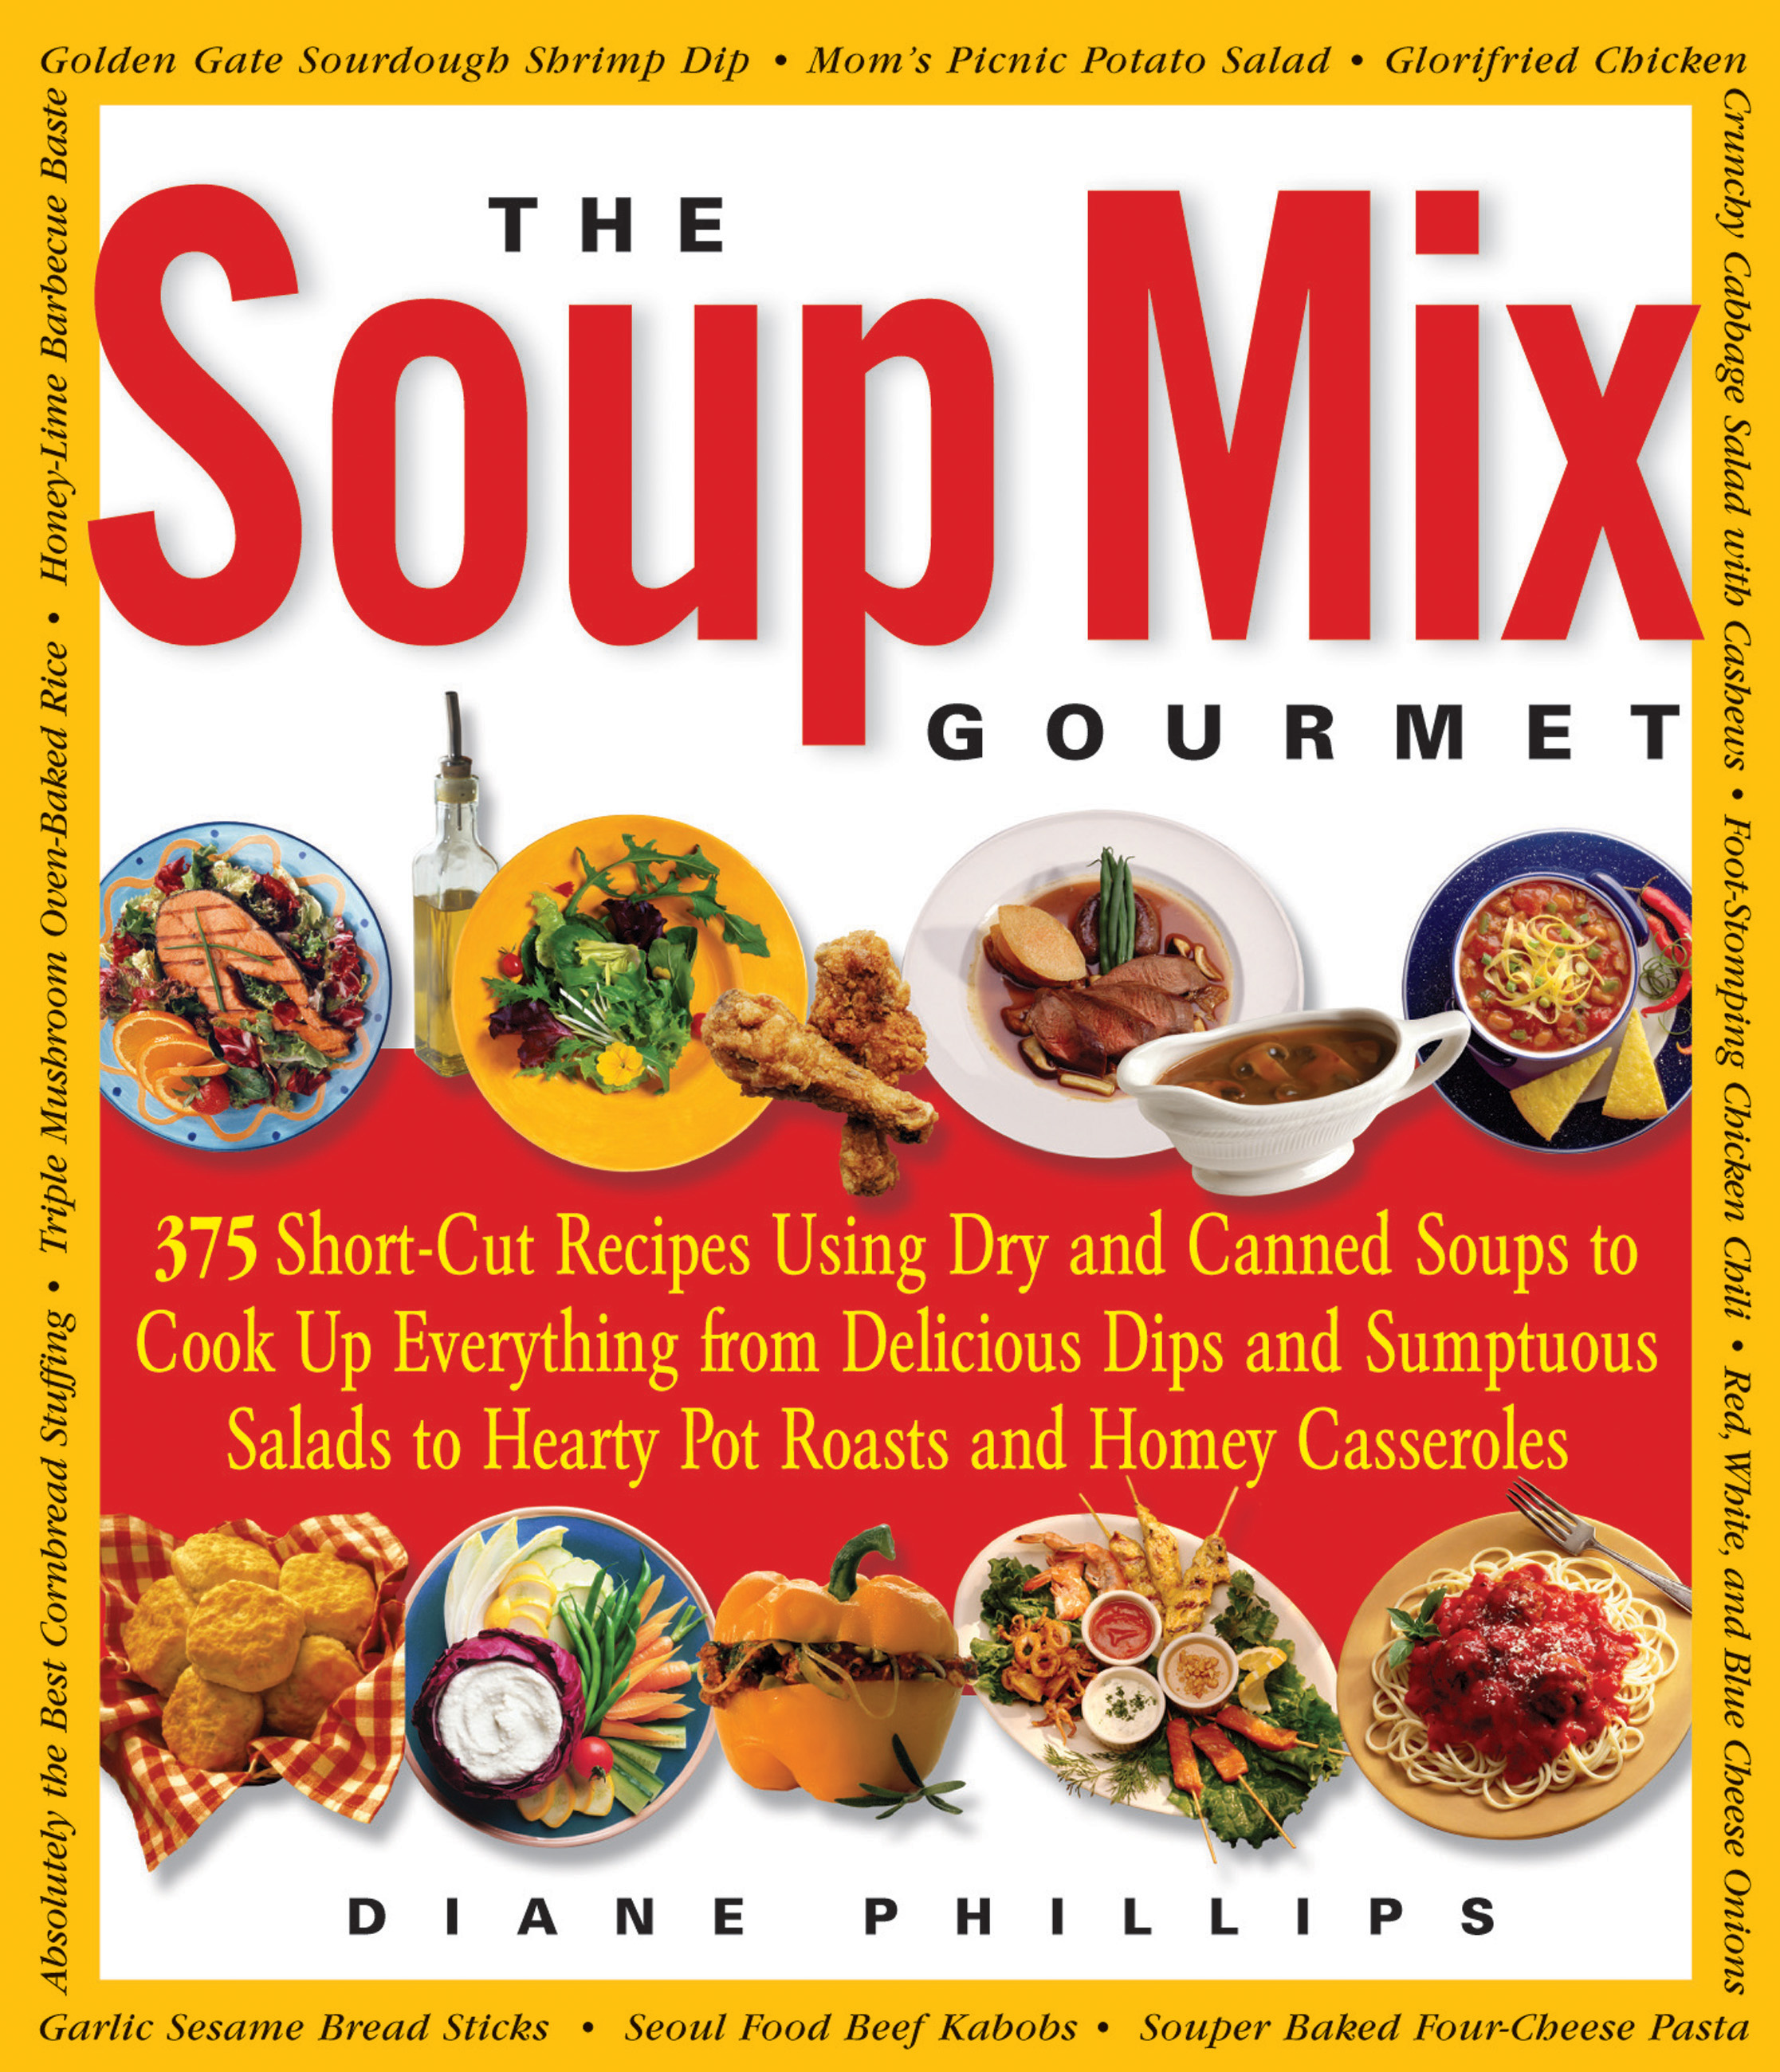 Cover image for The Soup Mix Gourmet [electronic resource] : 375 Short-Cut Recipes Using Dry and Canned Soups to Cook Up Everything from Delicious Dips and Sumptuous Salads to Hearty Pot Roasts and Homey Casseroles